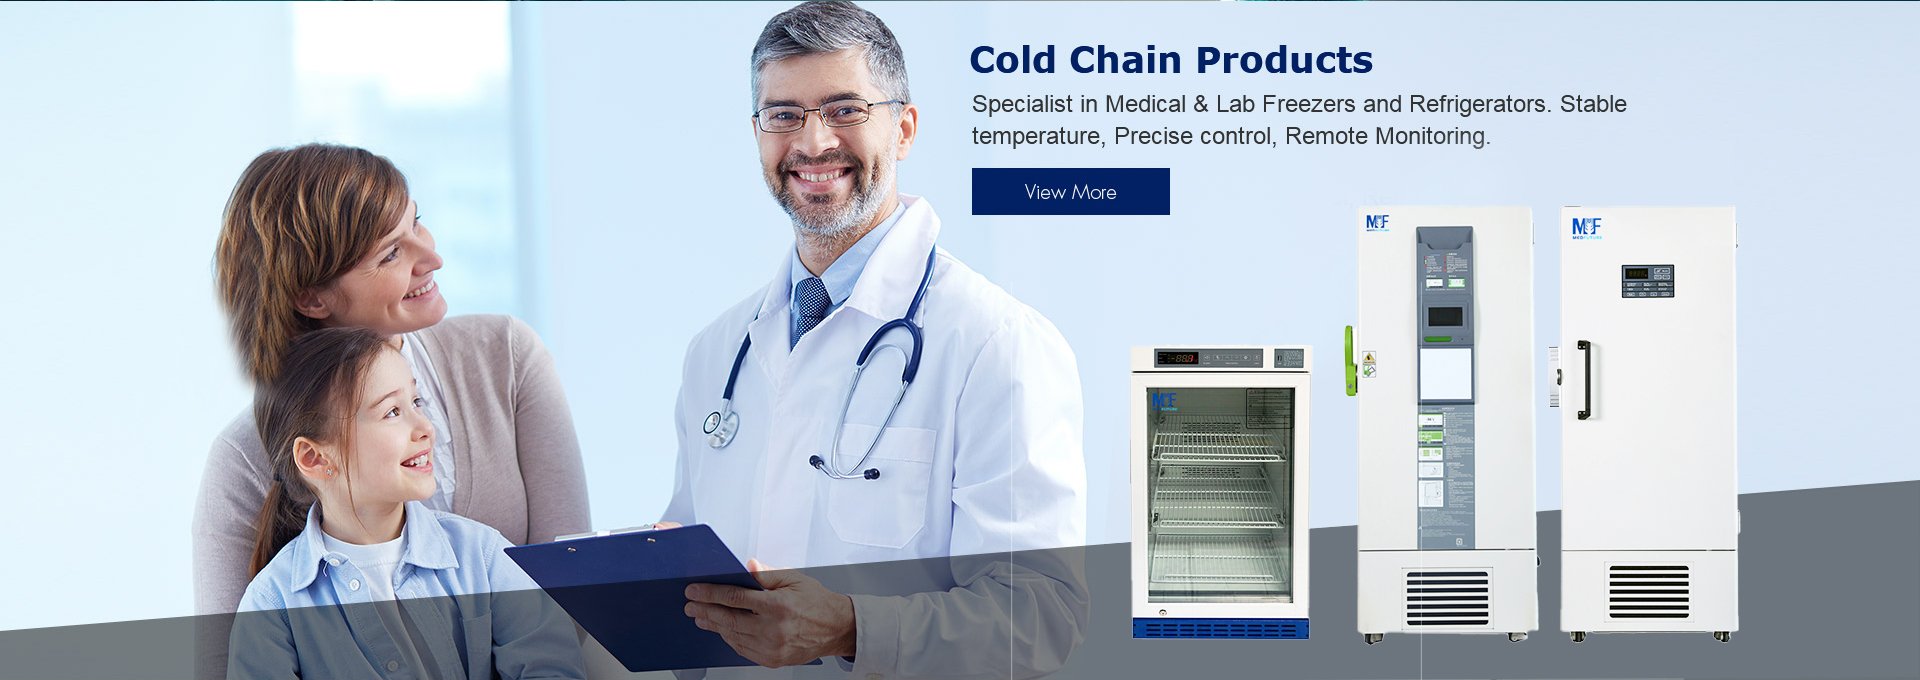 Cold Chain Products